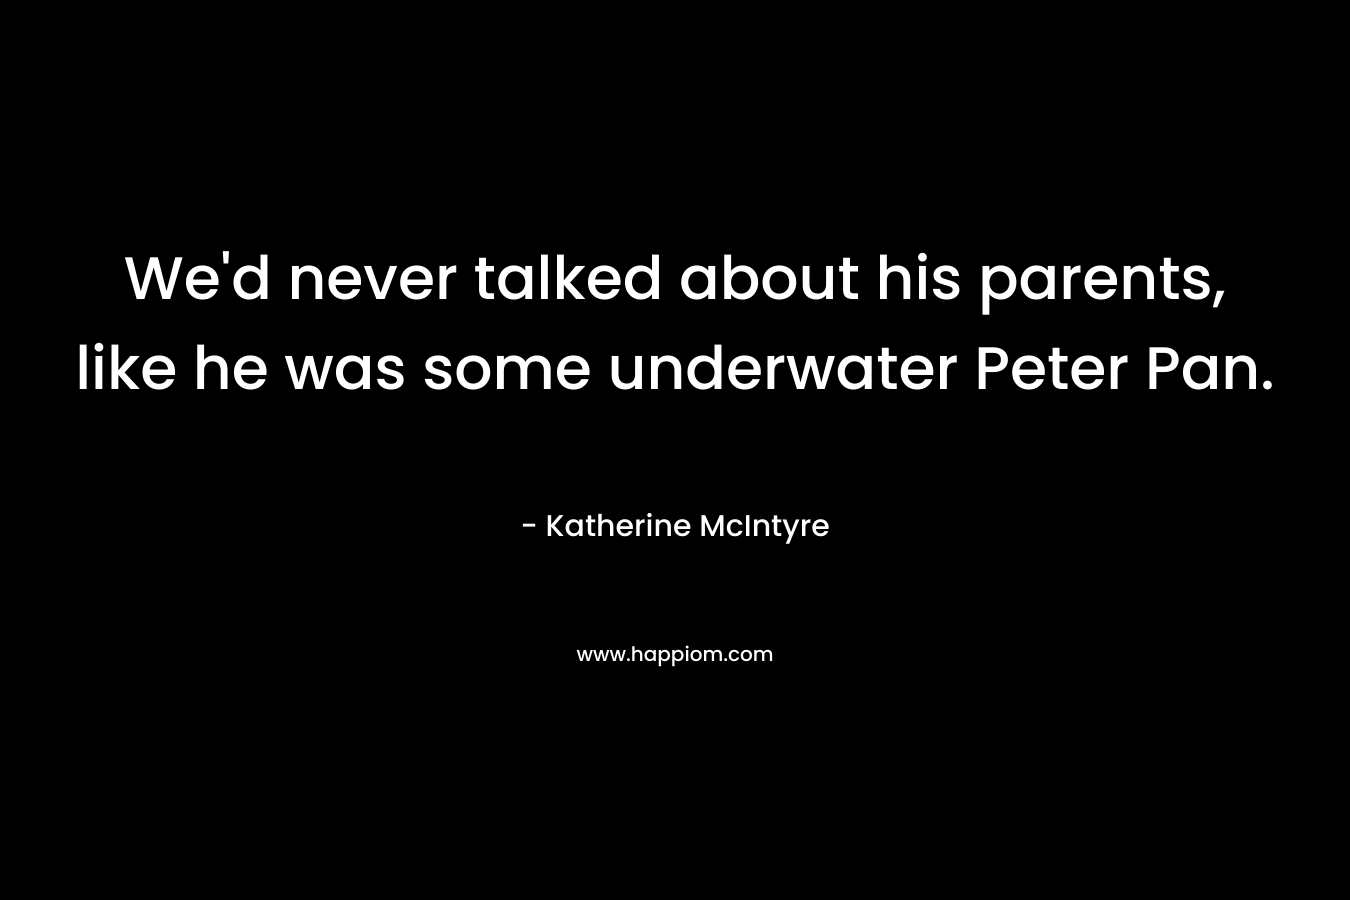 We'd never talked about his parents, like he was some underwater Peter Pan.